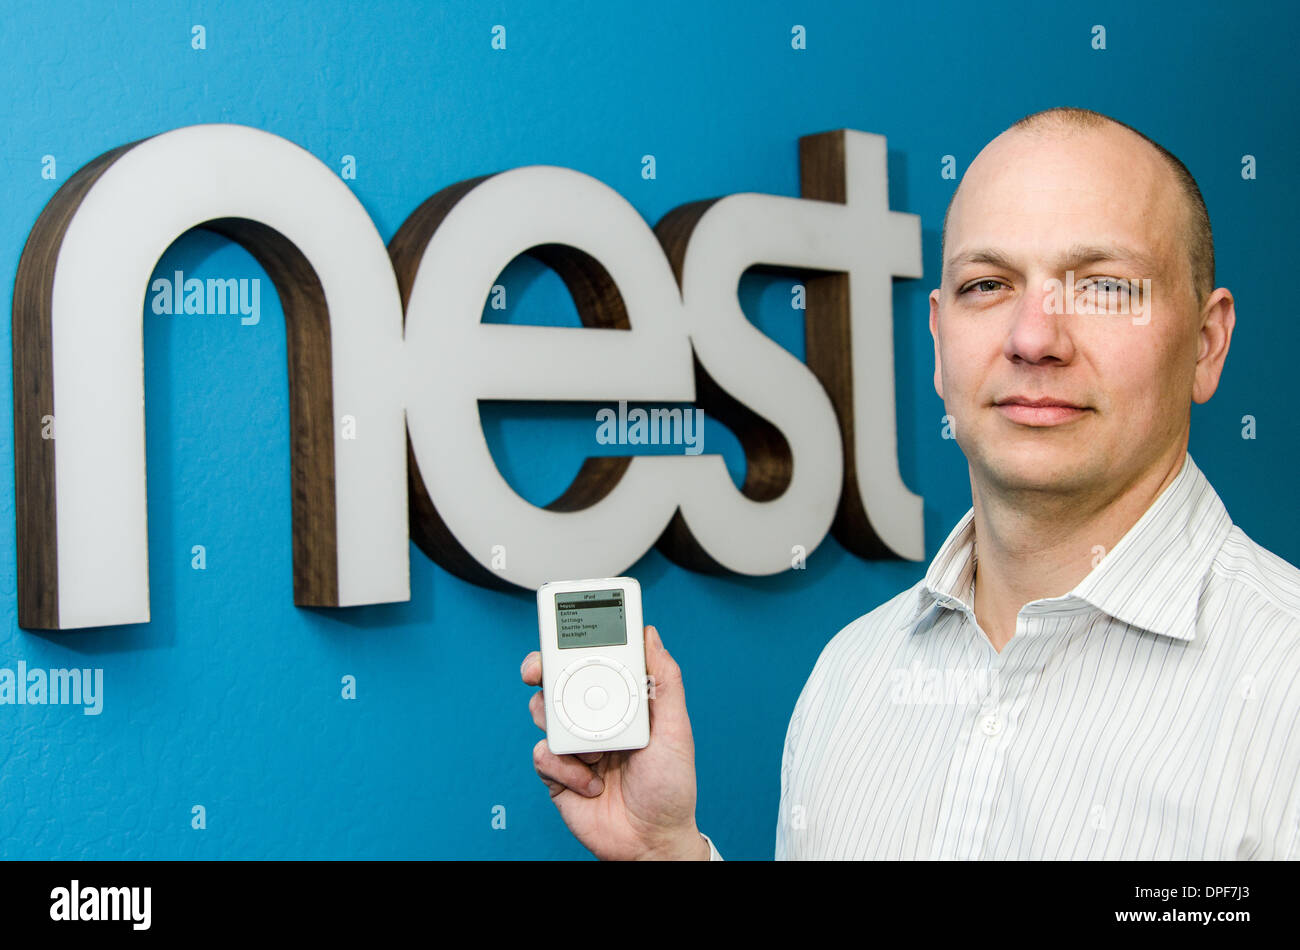 At Apple, Tony Fadell helped develop both iPod and iPhone. He co-found smart appliance maker Nest, which was acquired by Google in January 2014. In an unusual photo, Fadell is seen here in 2012 at Nest HQ in Palo Alto, CA, showing the original iPod. Stock Photo